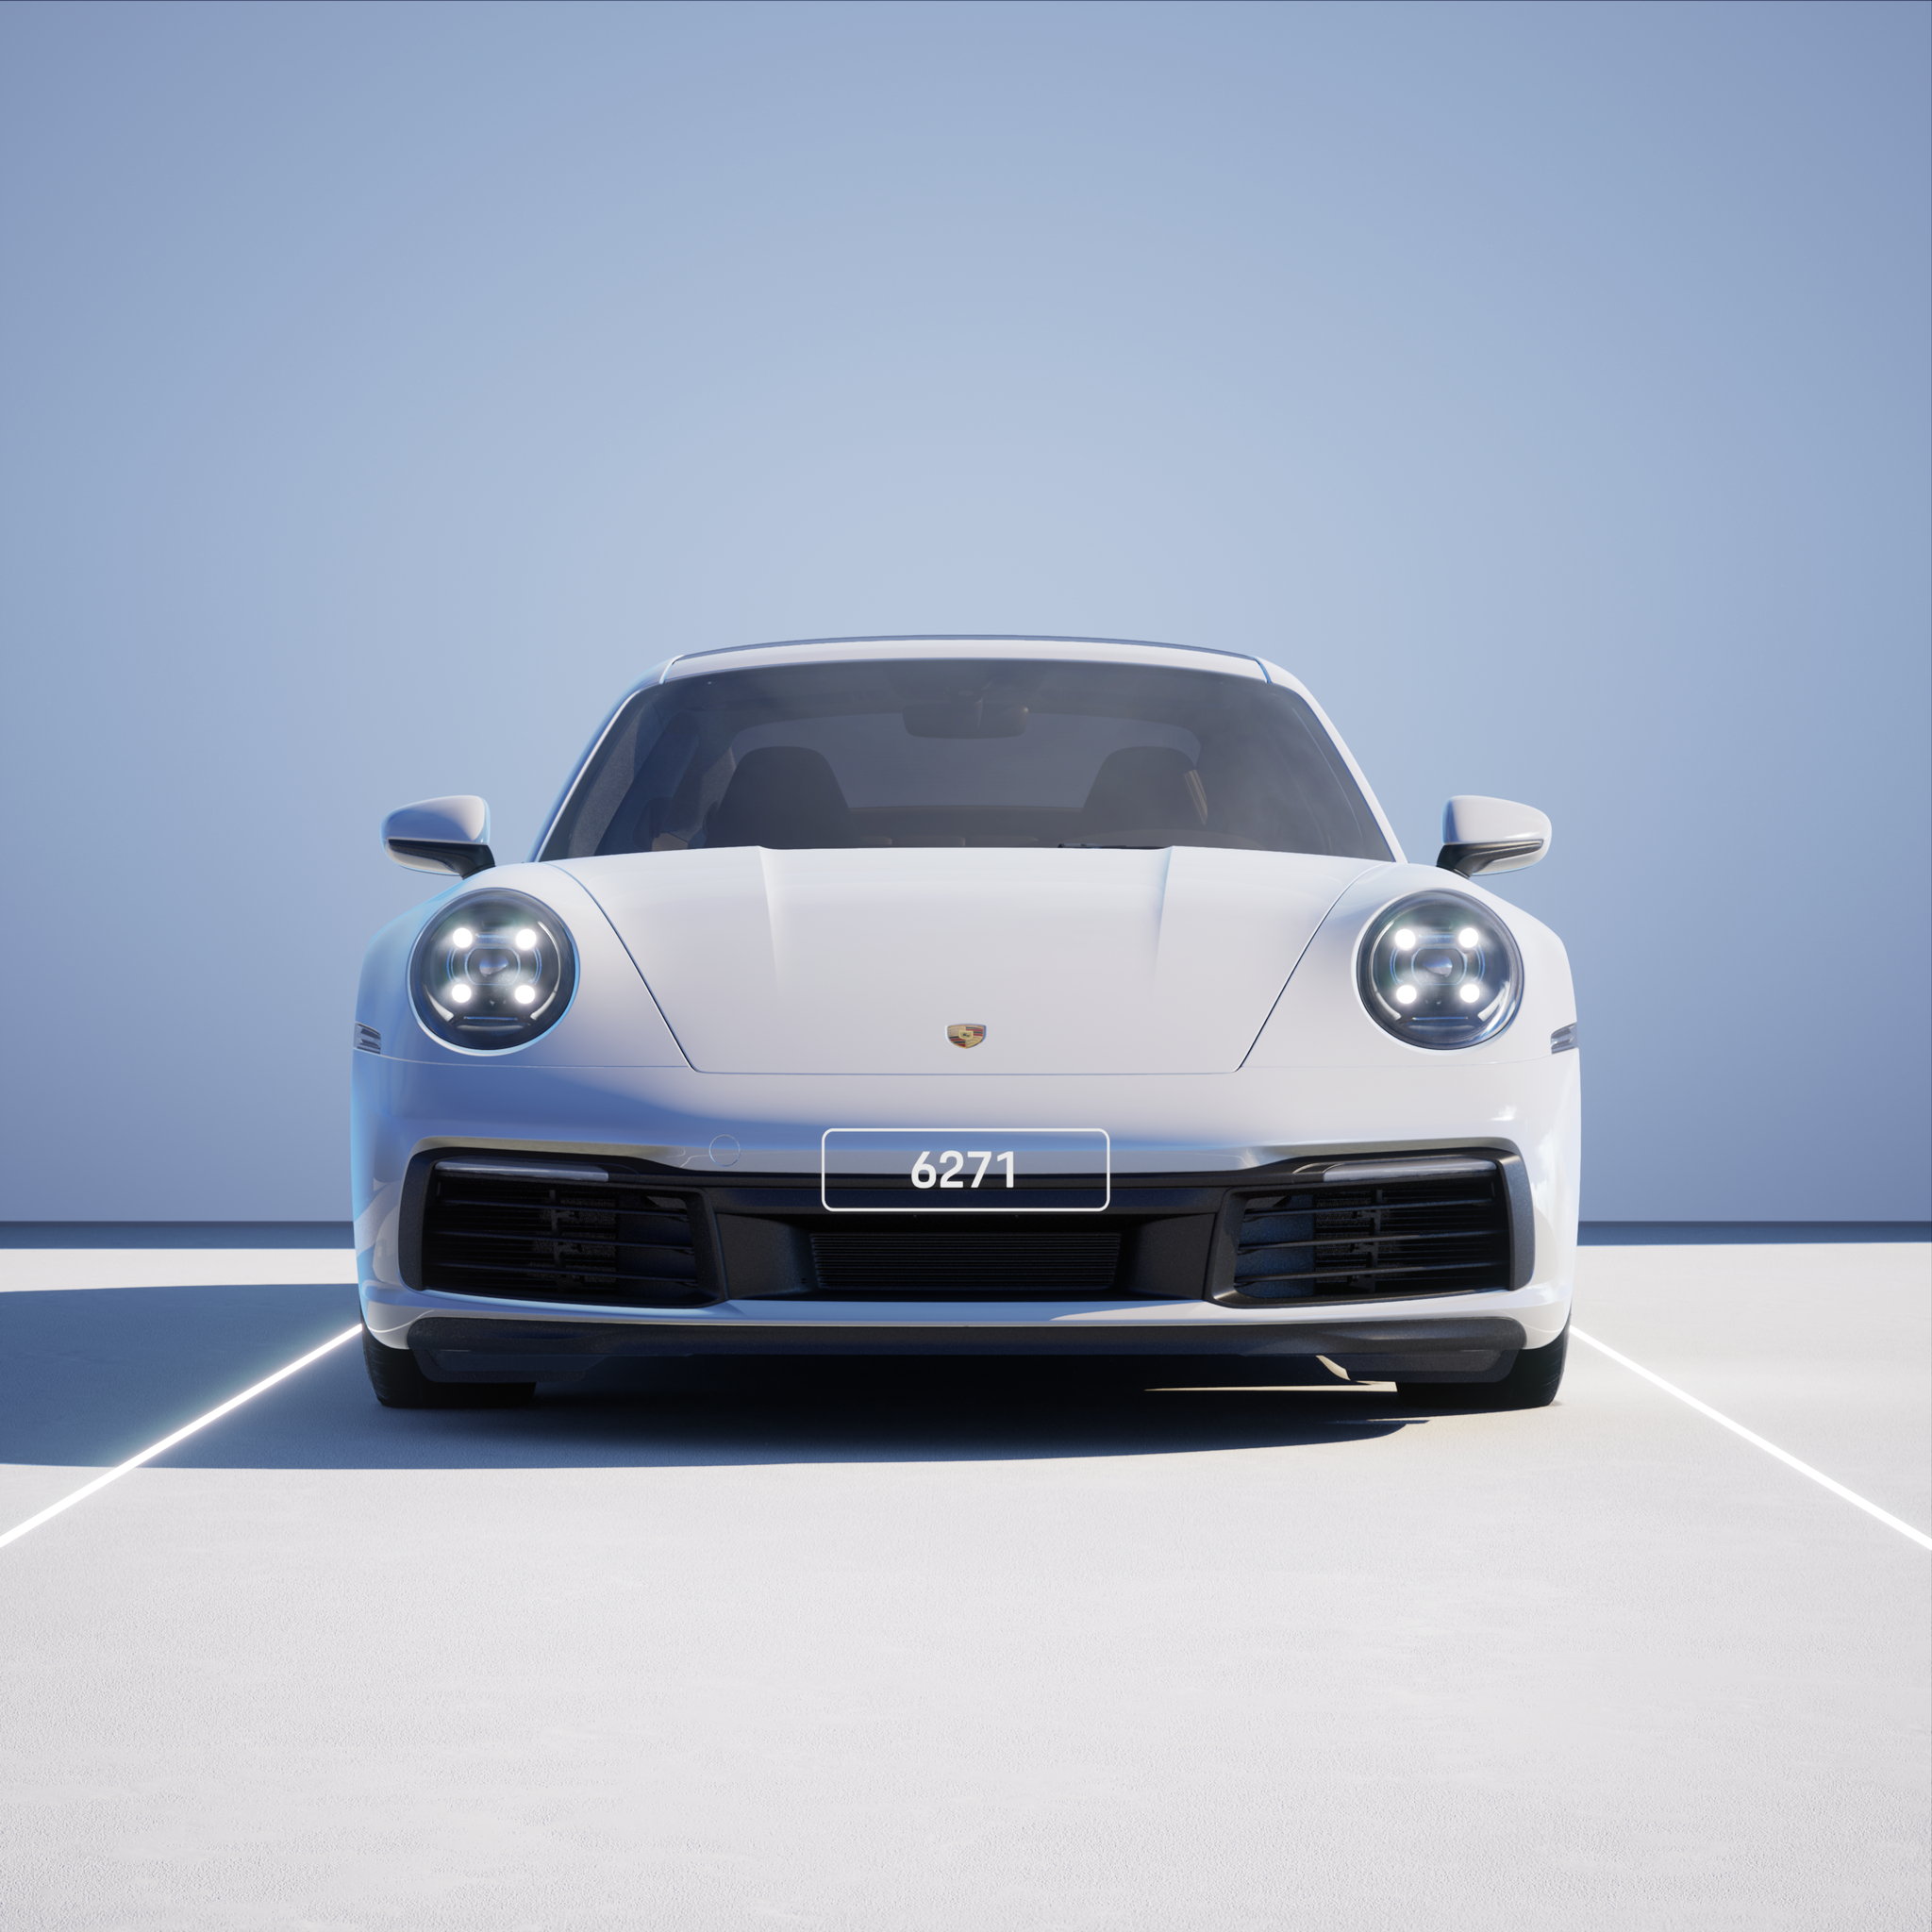 The PORSCHΞ 911 6271 image in phase